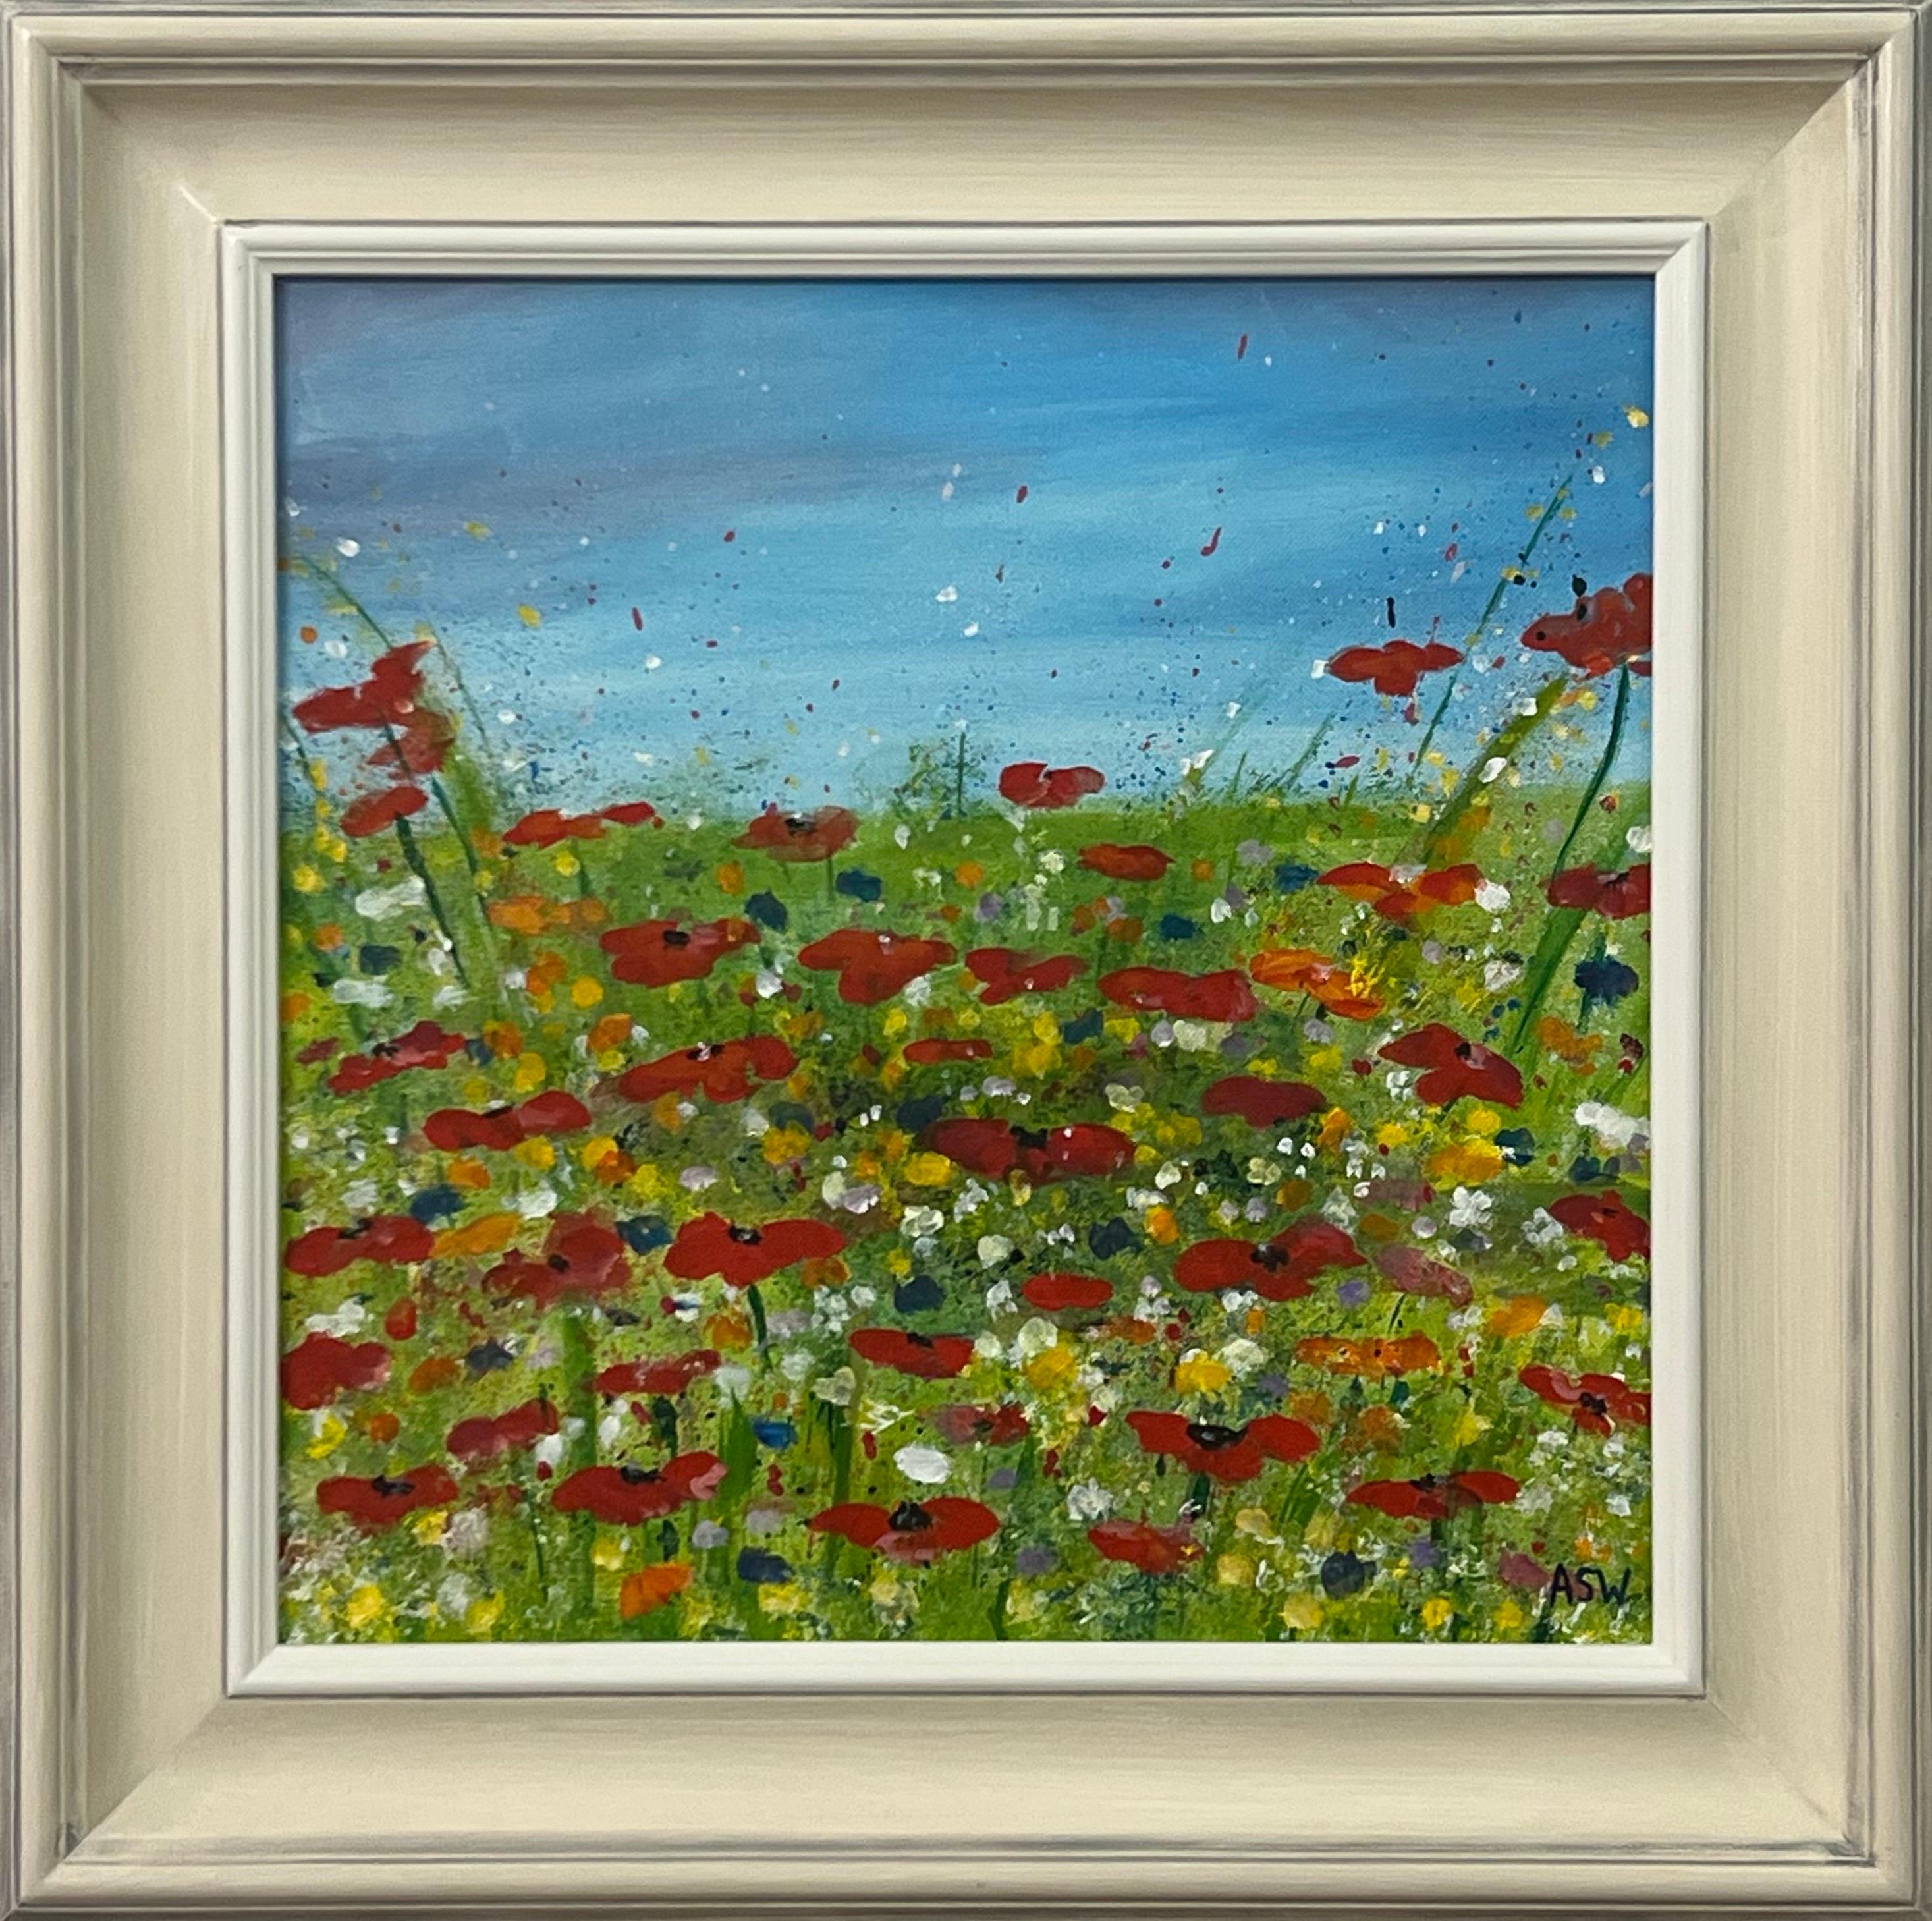 Red Poppy Flowers in a Wild Green Meadow with a Blue Sky by Contemporary Artist